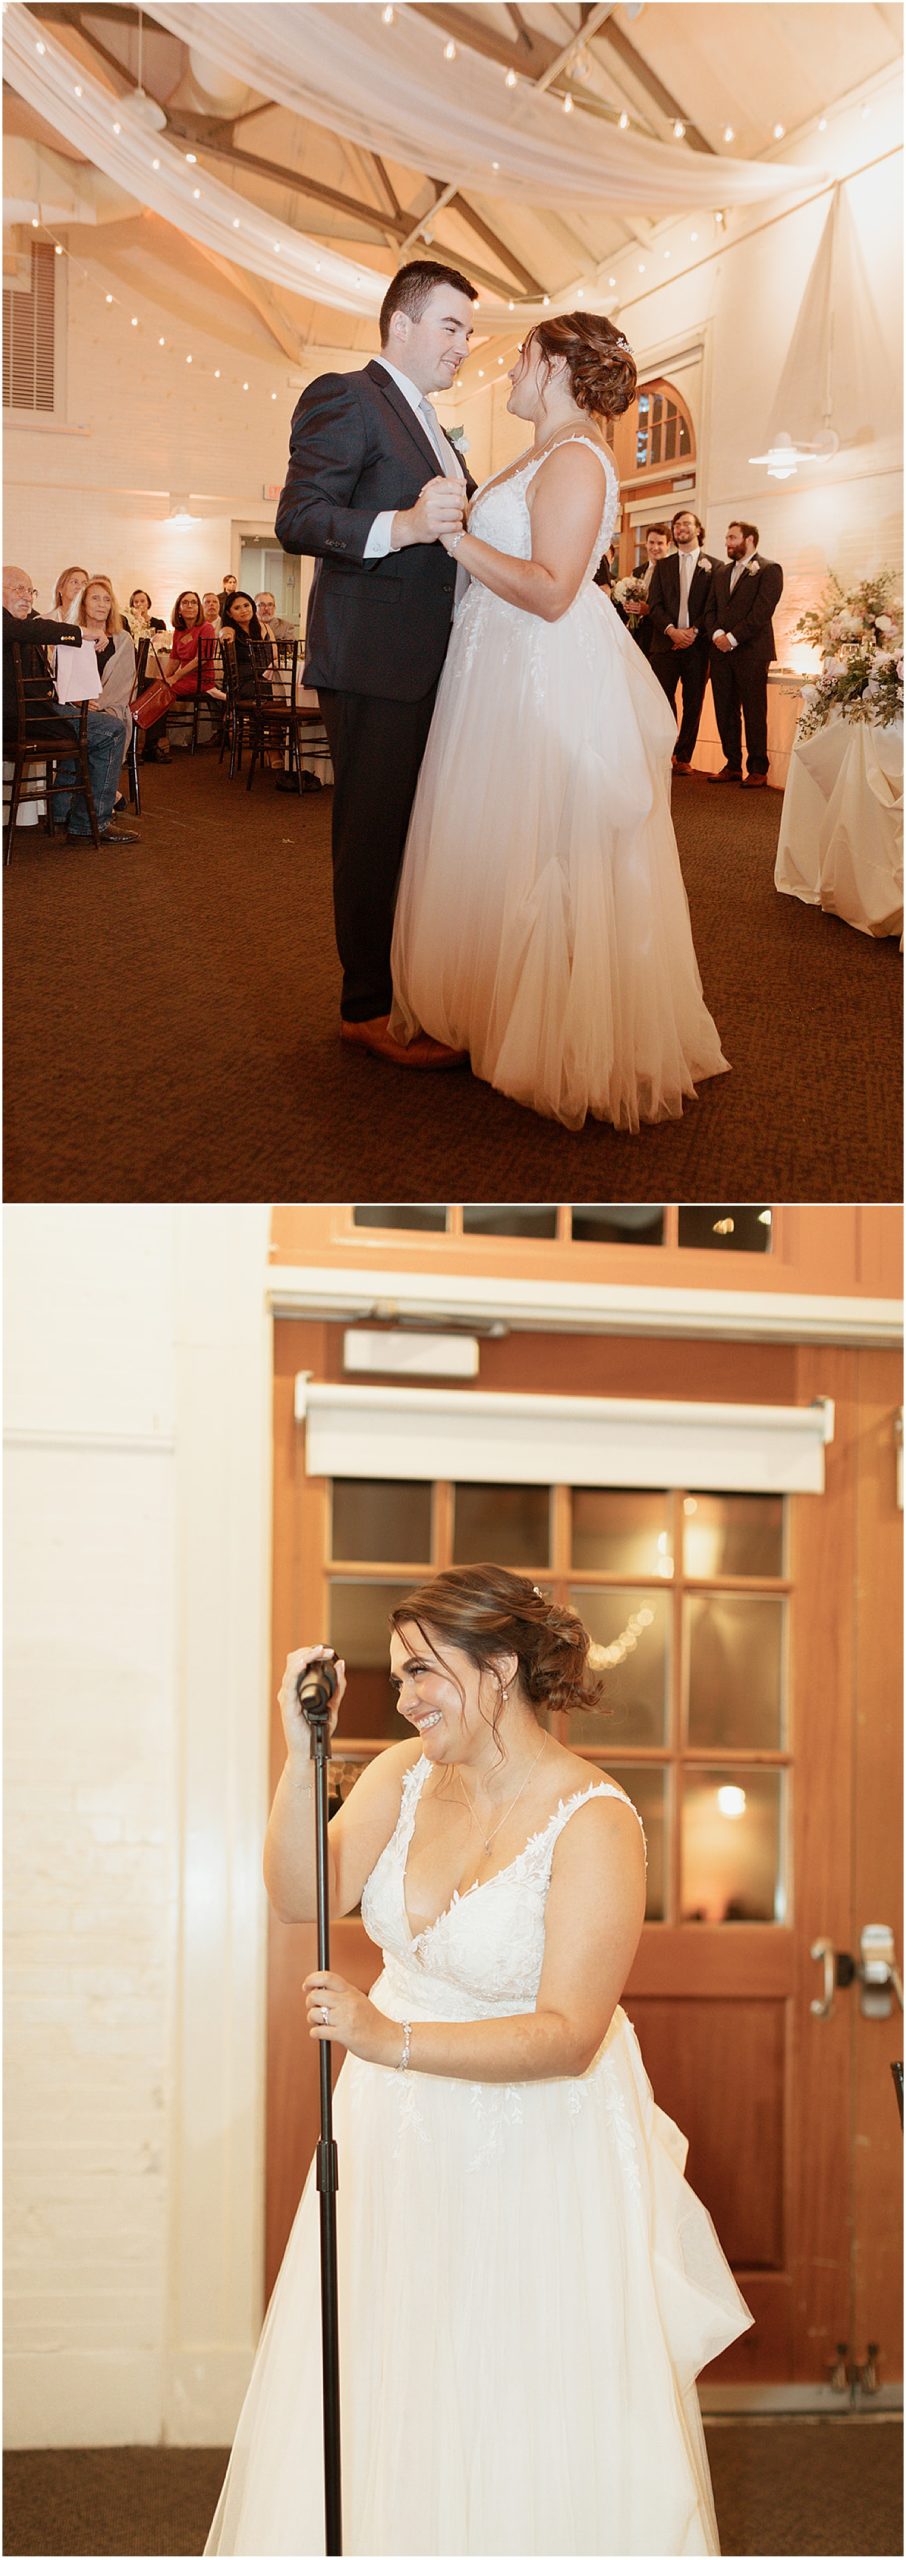 First-dance-at-Gardens-at-Elm-Bank-wedding-reception-scaled